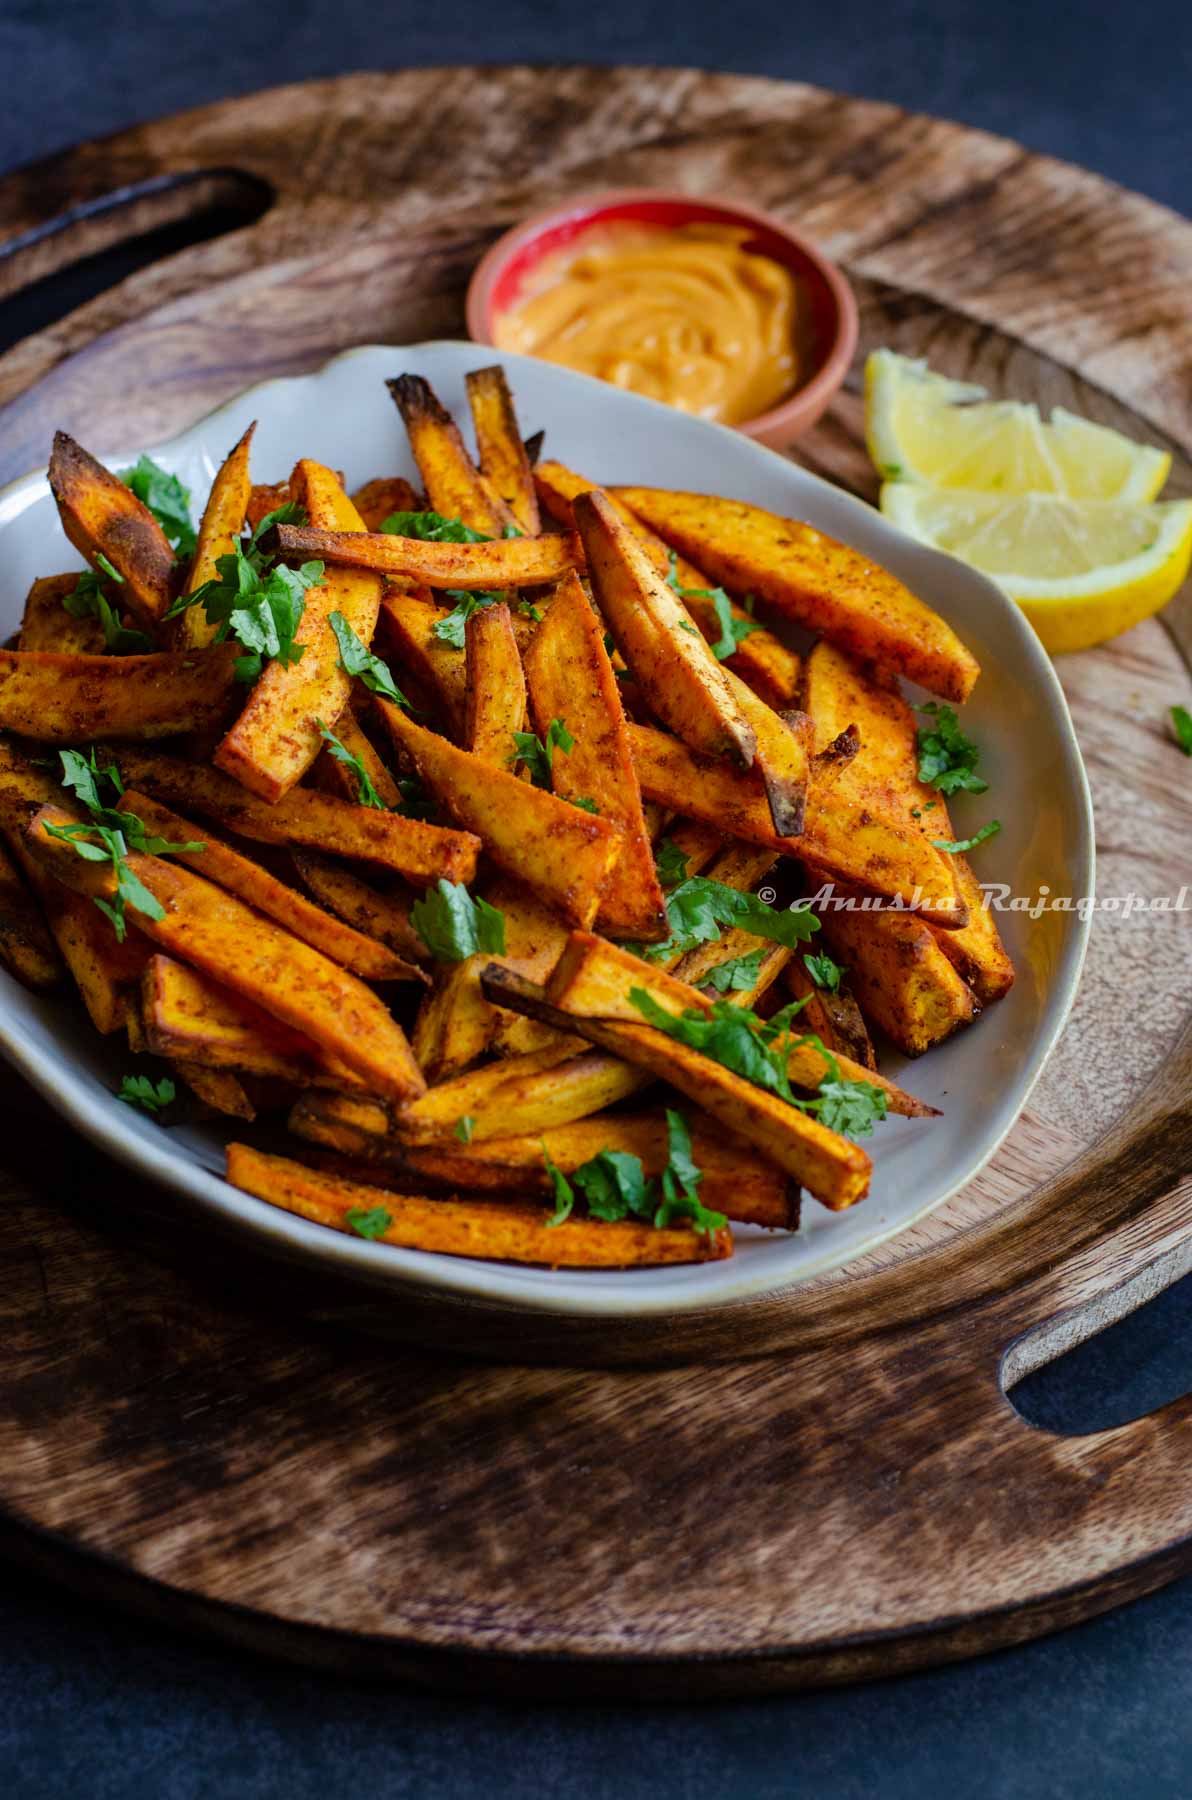 air fried sweet potato chips served in a beige irregular rimmed shallow bowl with spicy dip and lemon wedges